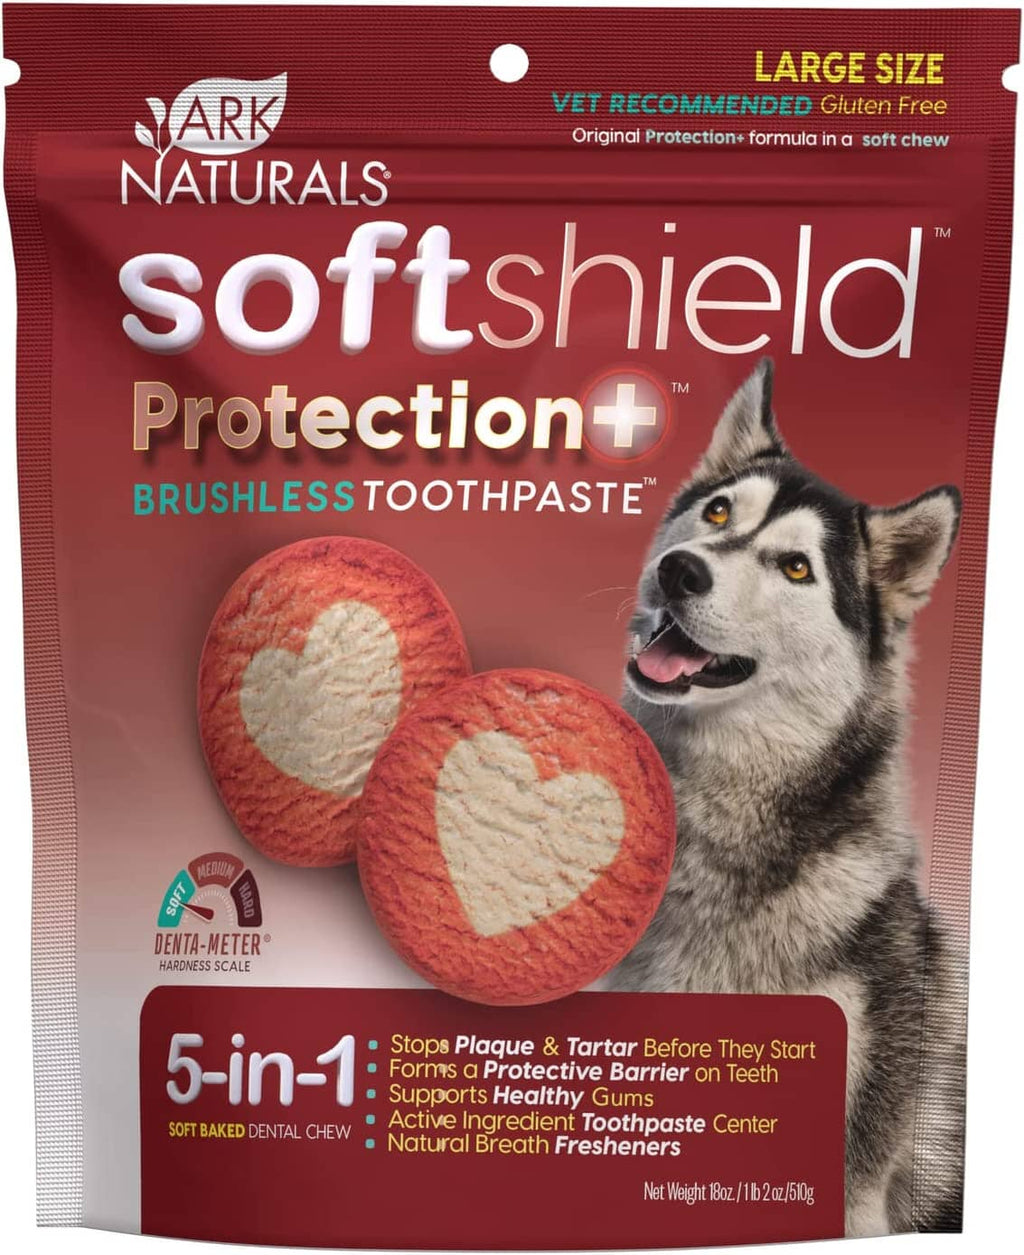 Ark Naturals Soft Shield Protection+ Brushless Toothpaste Dental Dog Chews - Large - 18...